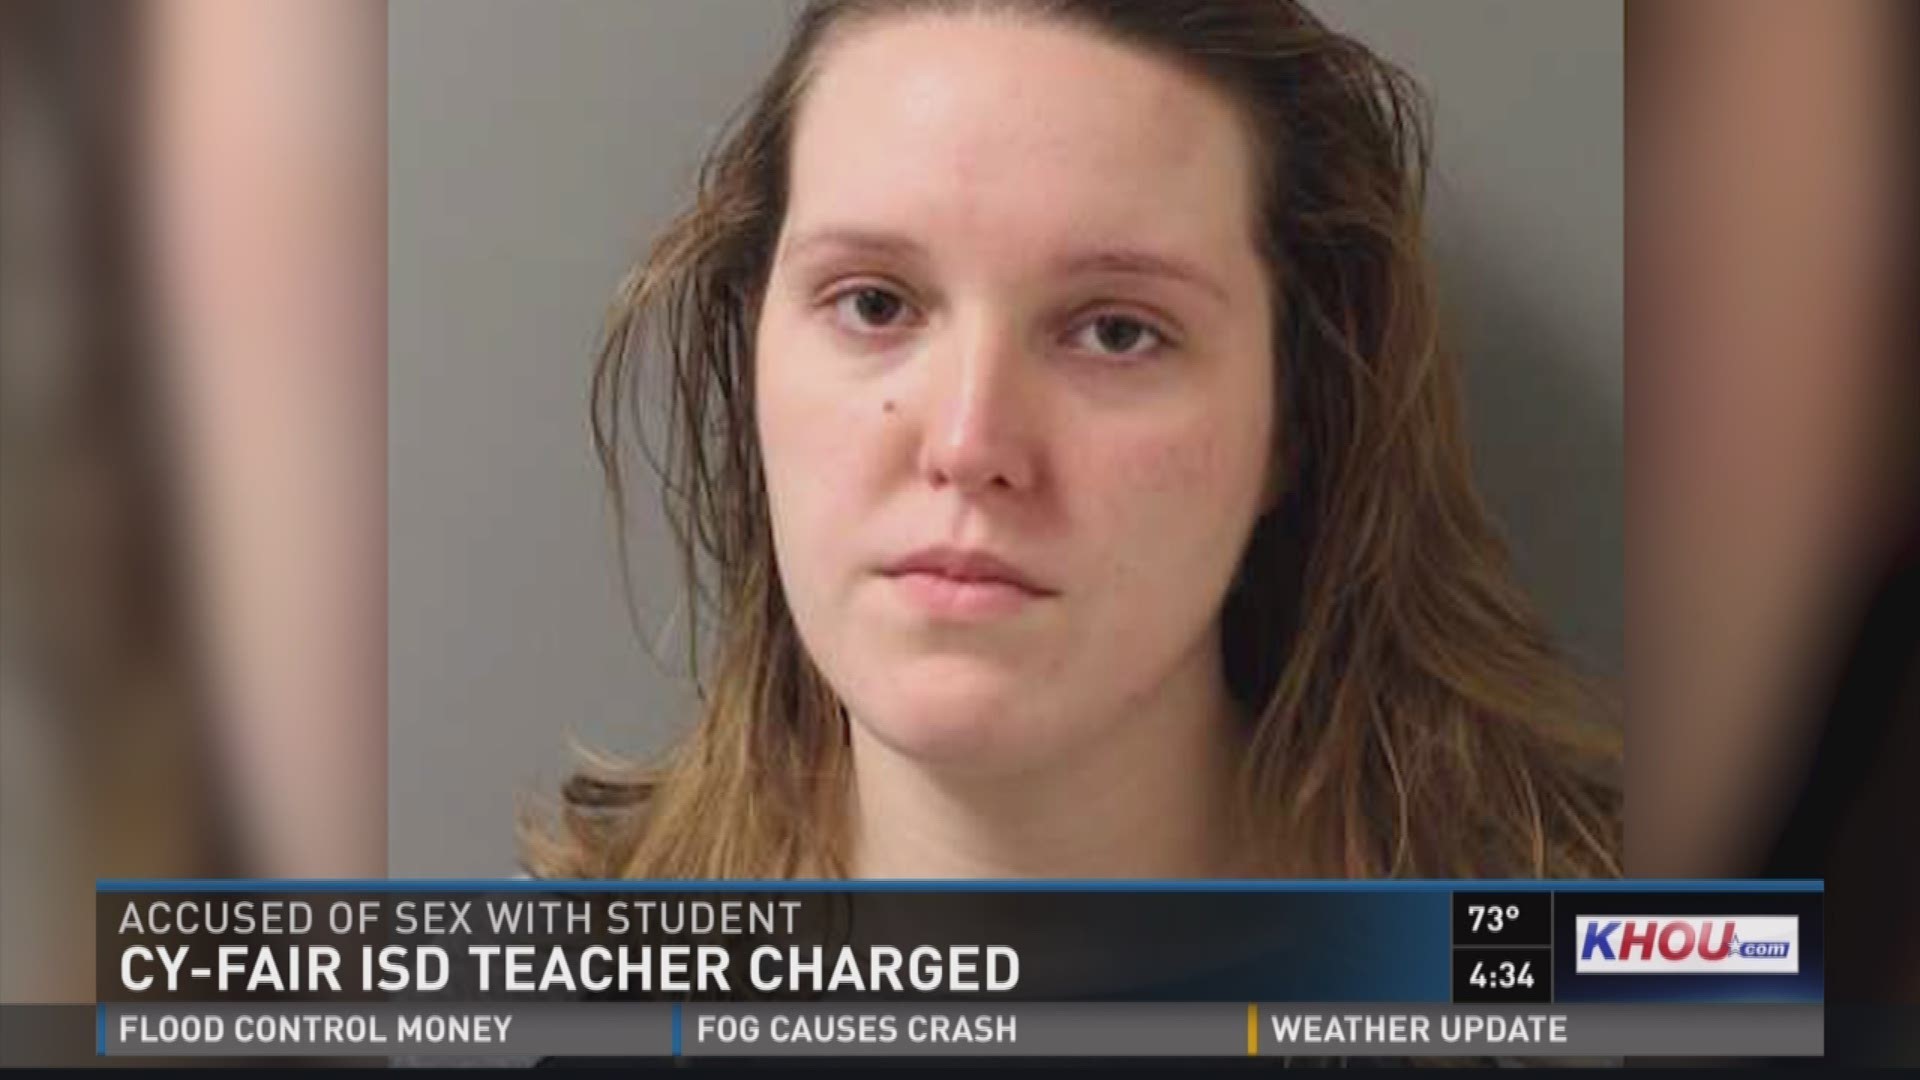 The high school teacher is accused of having a relationship with a 15-year-old boy.